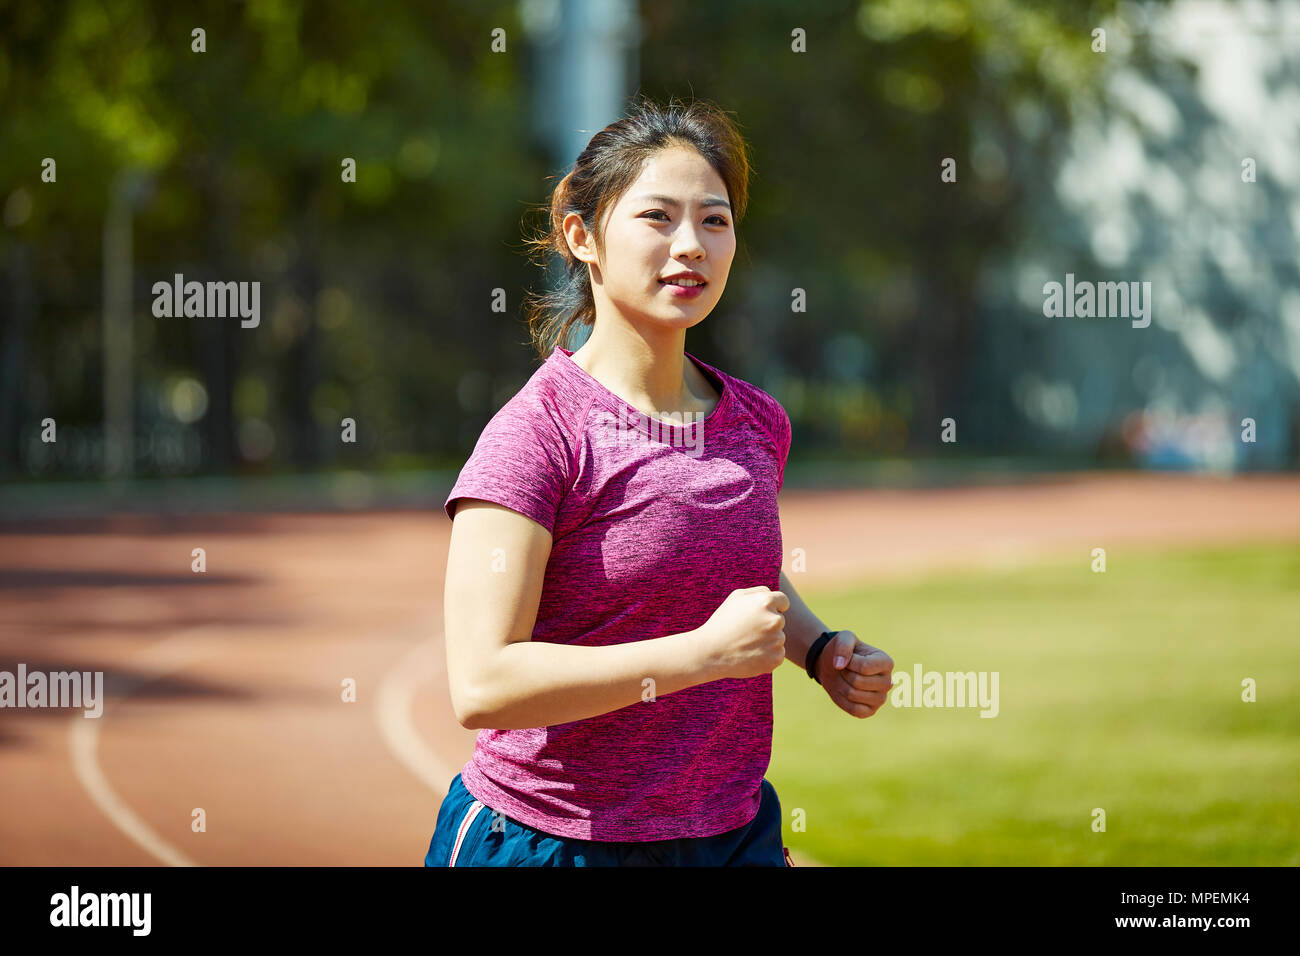 young asian female athlete running training on track outdoors. Stock Photo